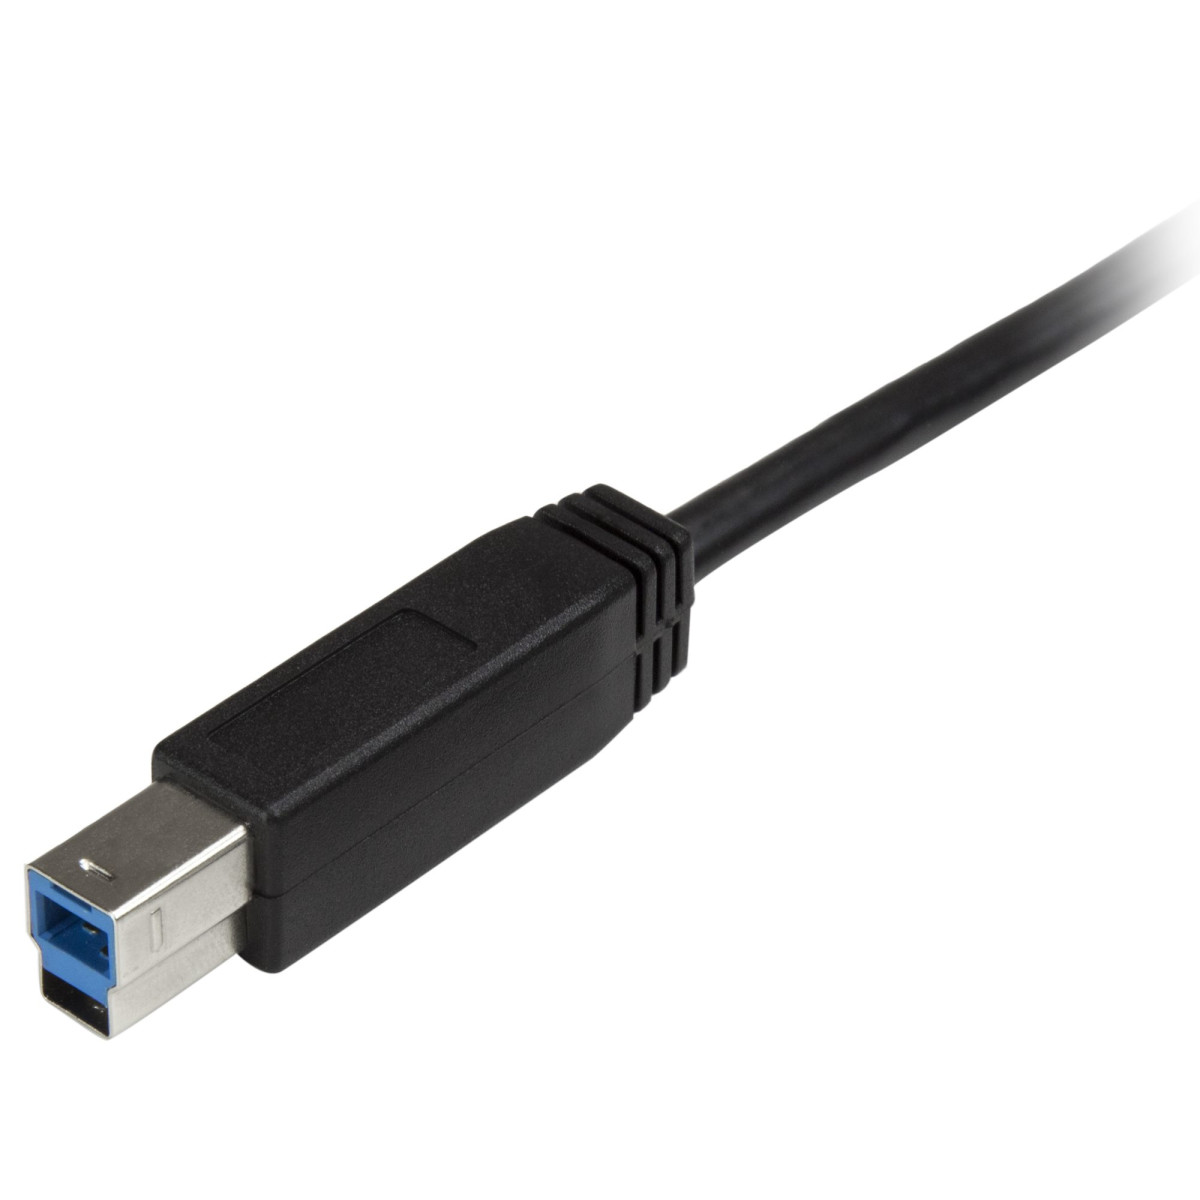 2m 6ft USB C to USB B Cable USB 3.0